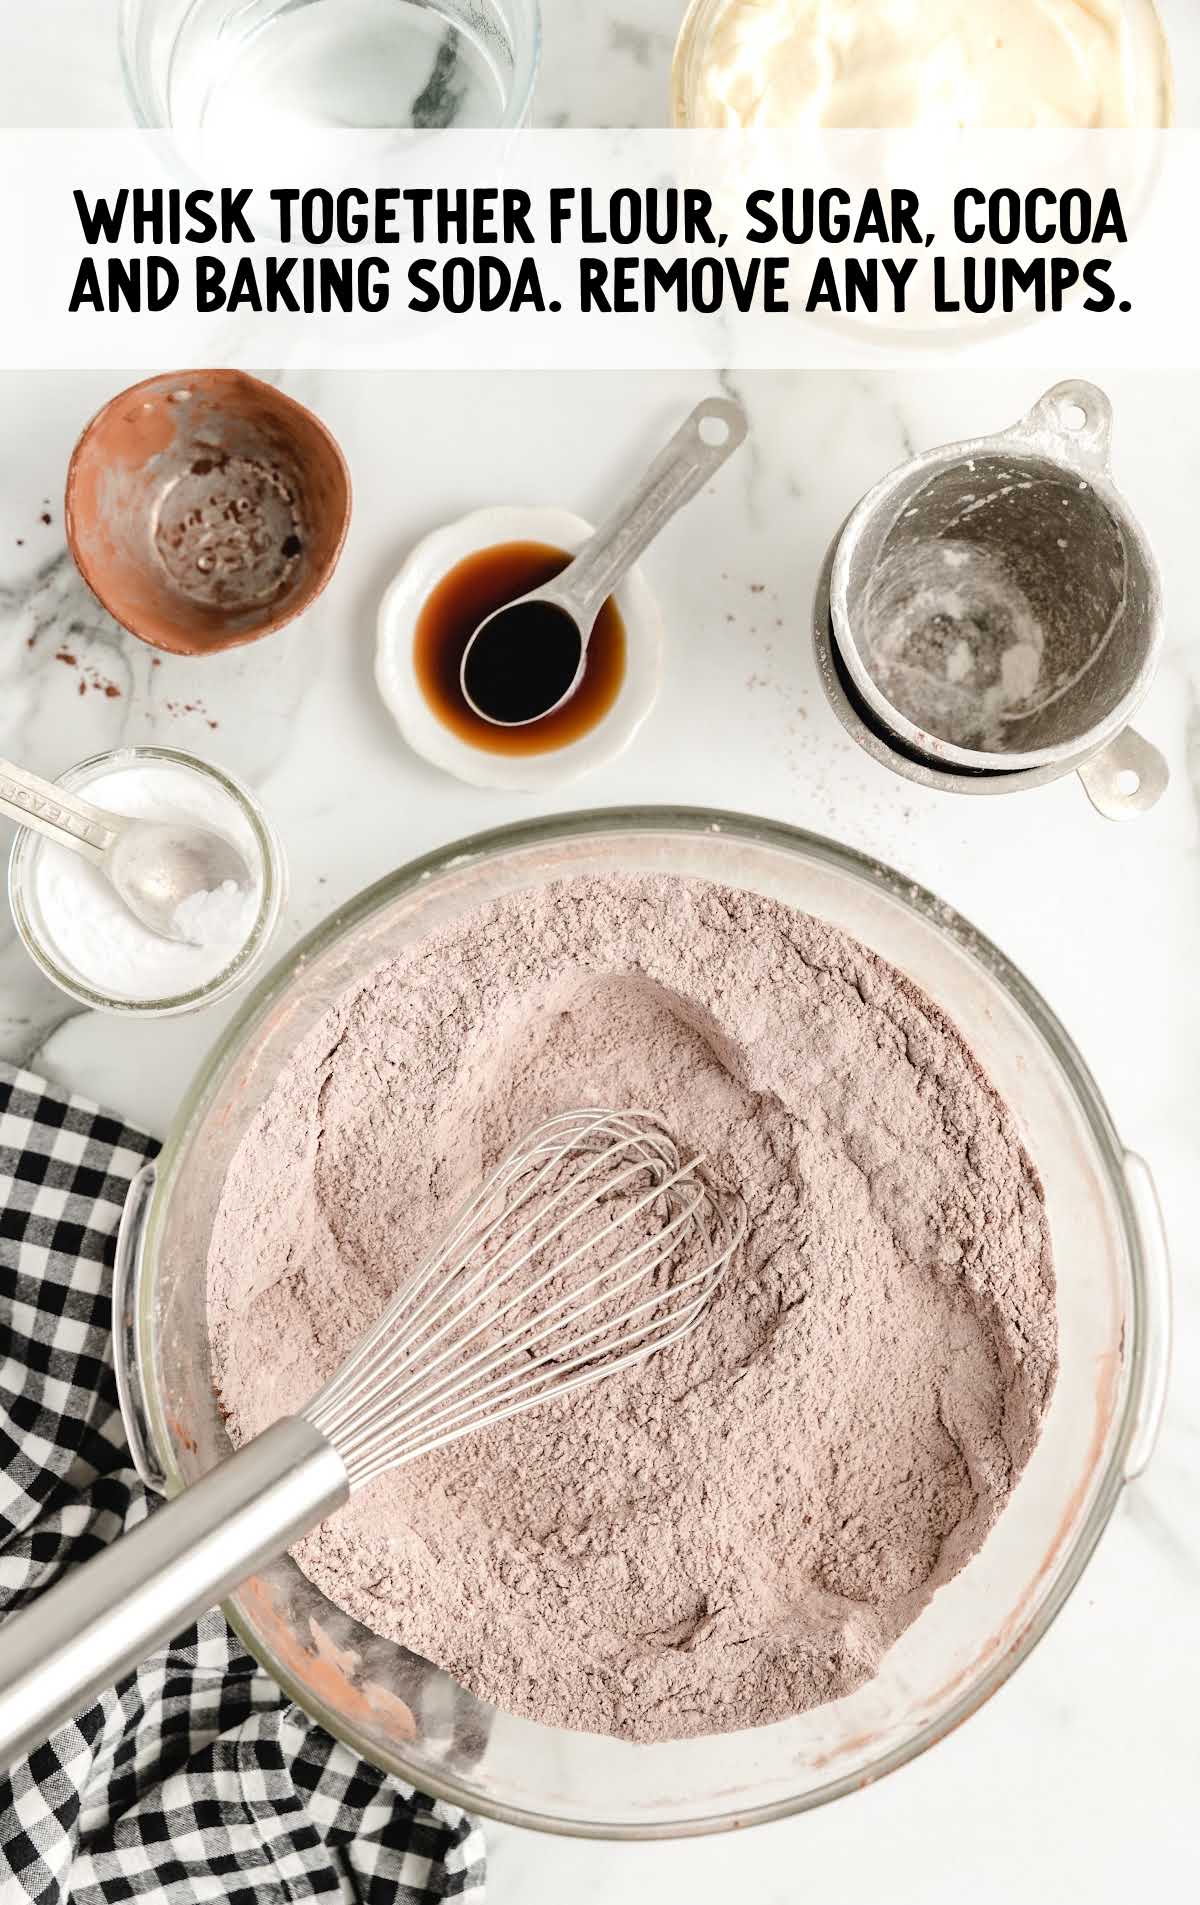 flour, sugar, cocoa, and baking soda whisked together in a bowl